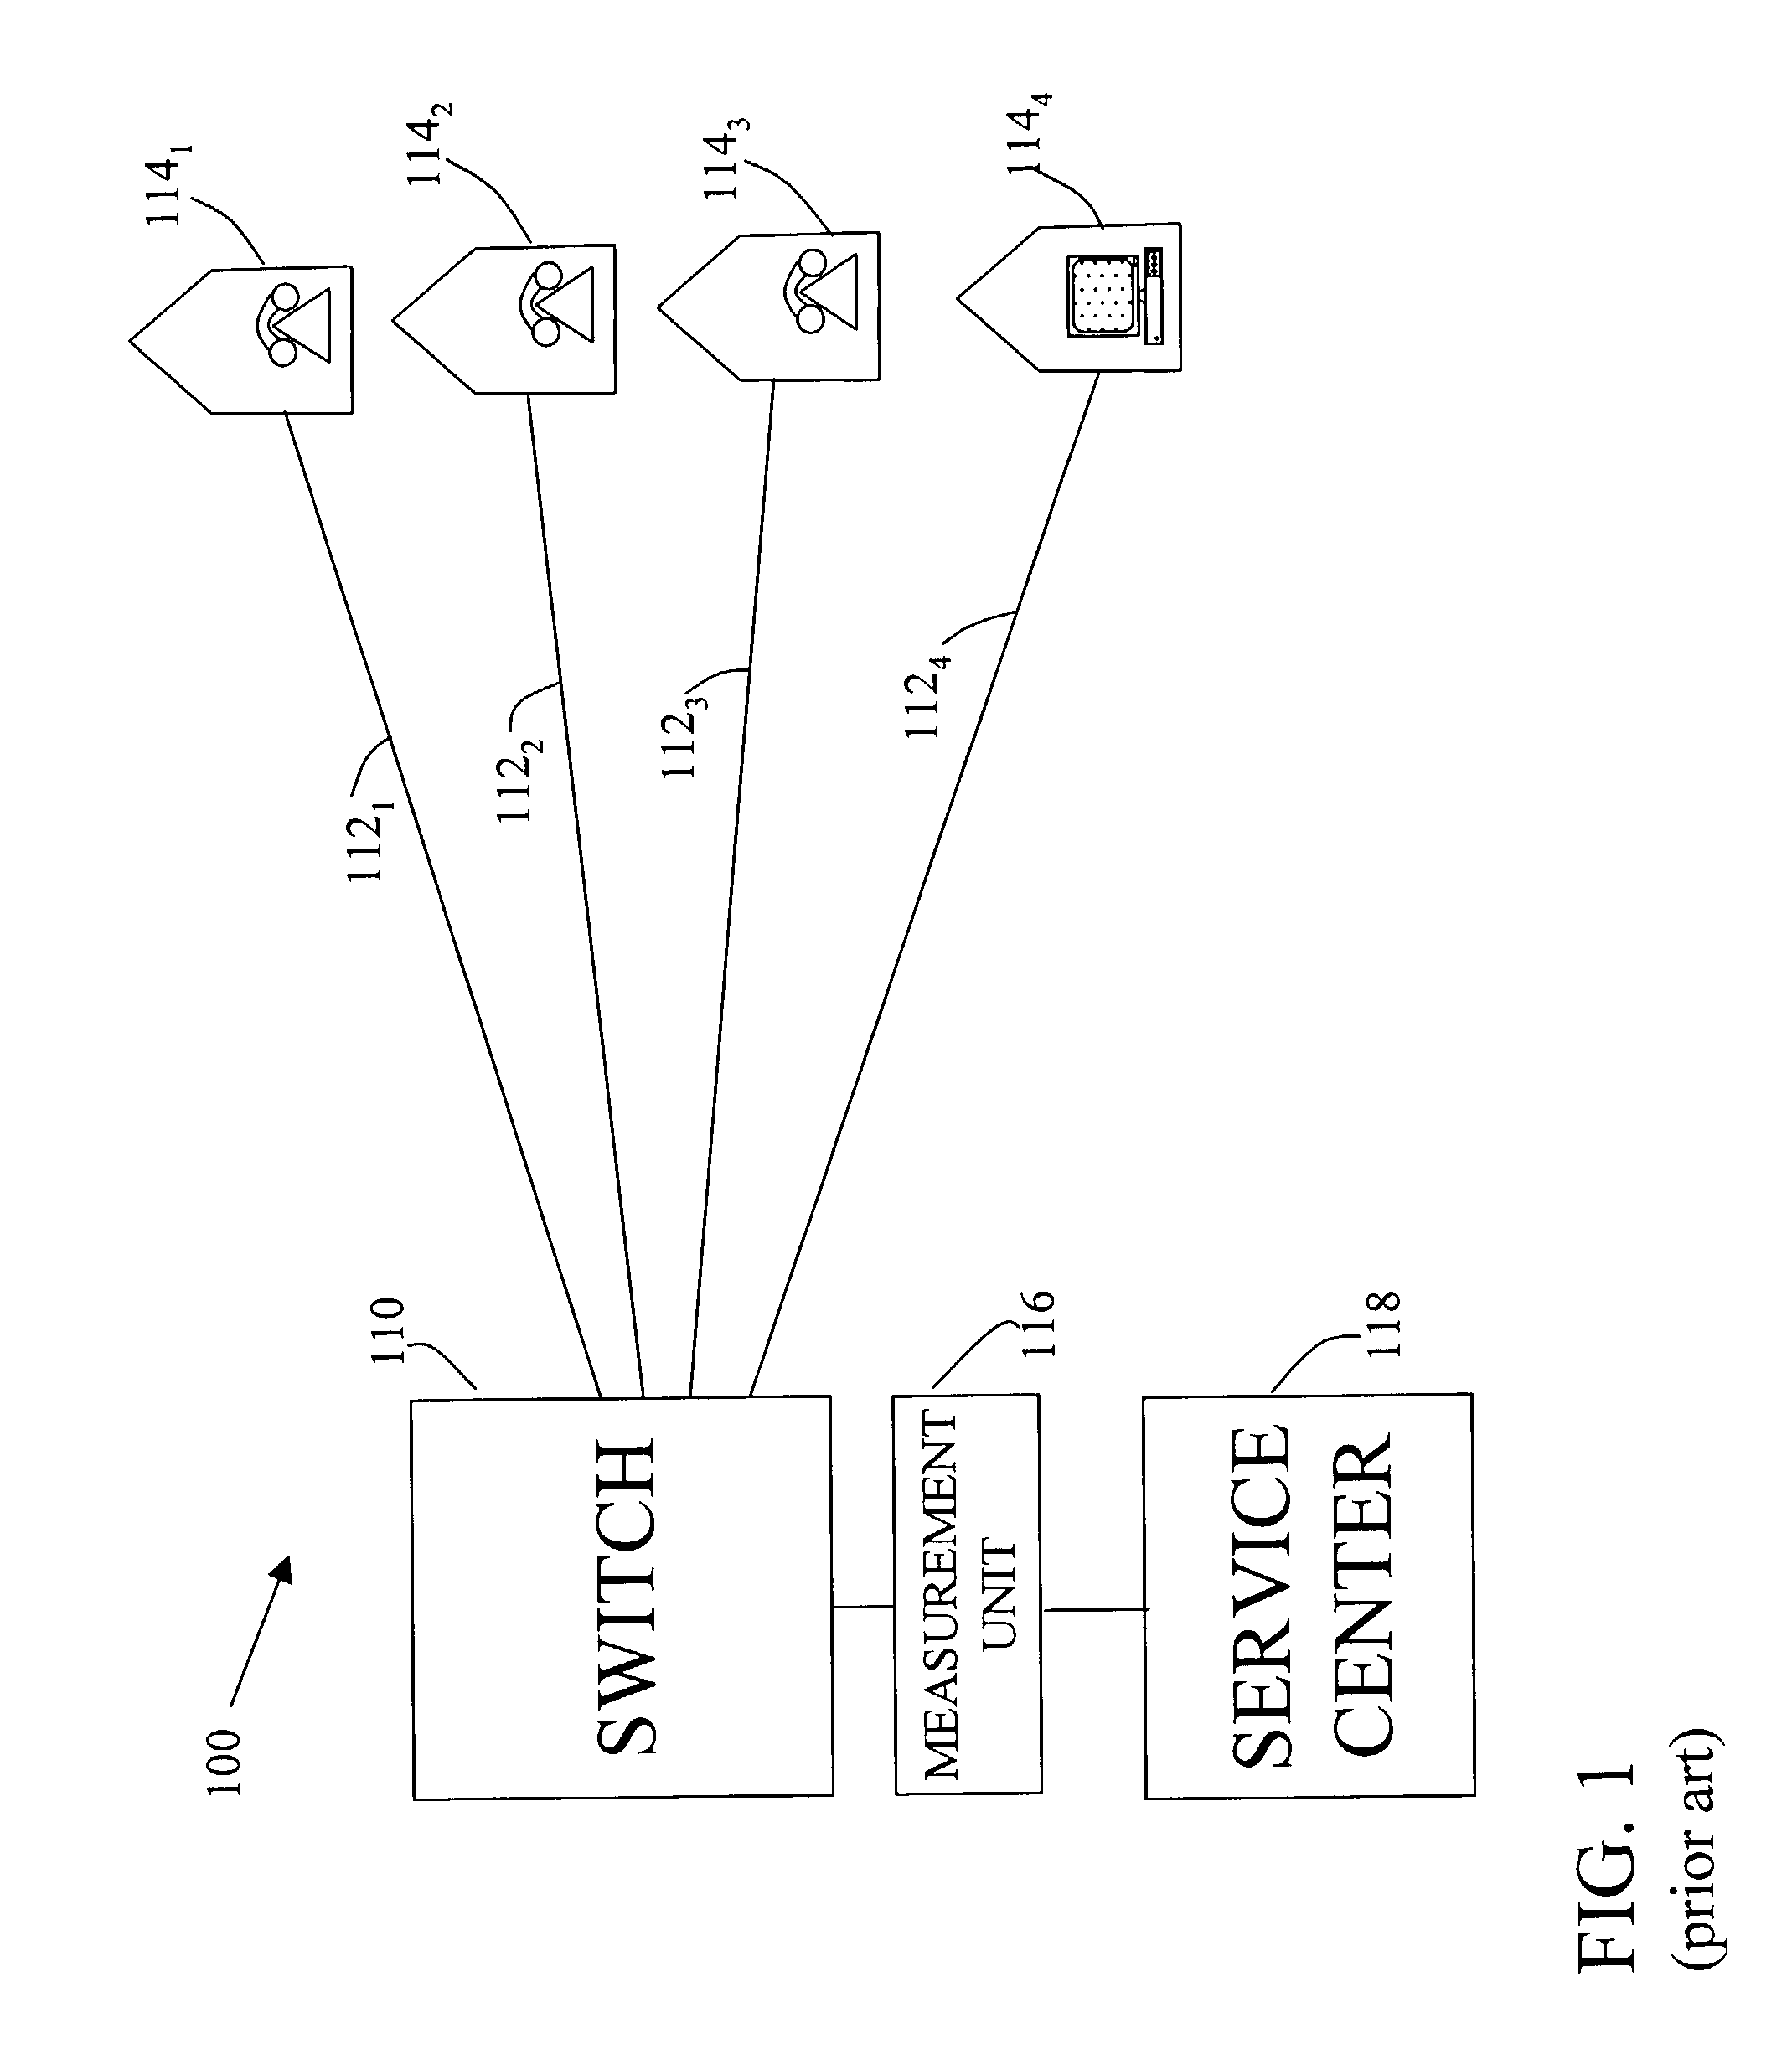 System and method for pre-qualification of telephone lines for DSL service using an average loop loss